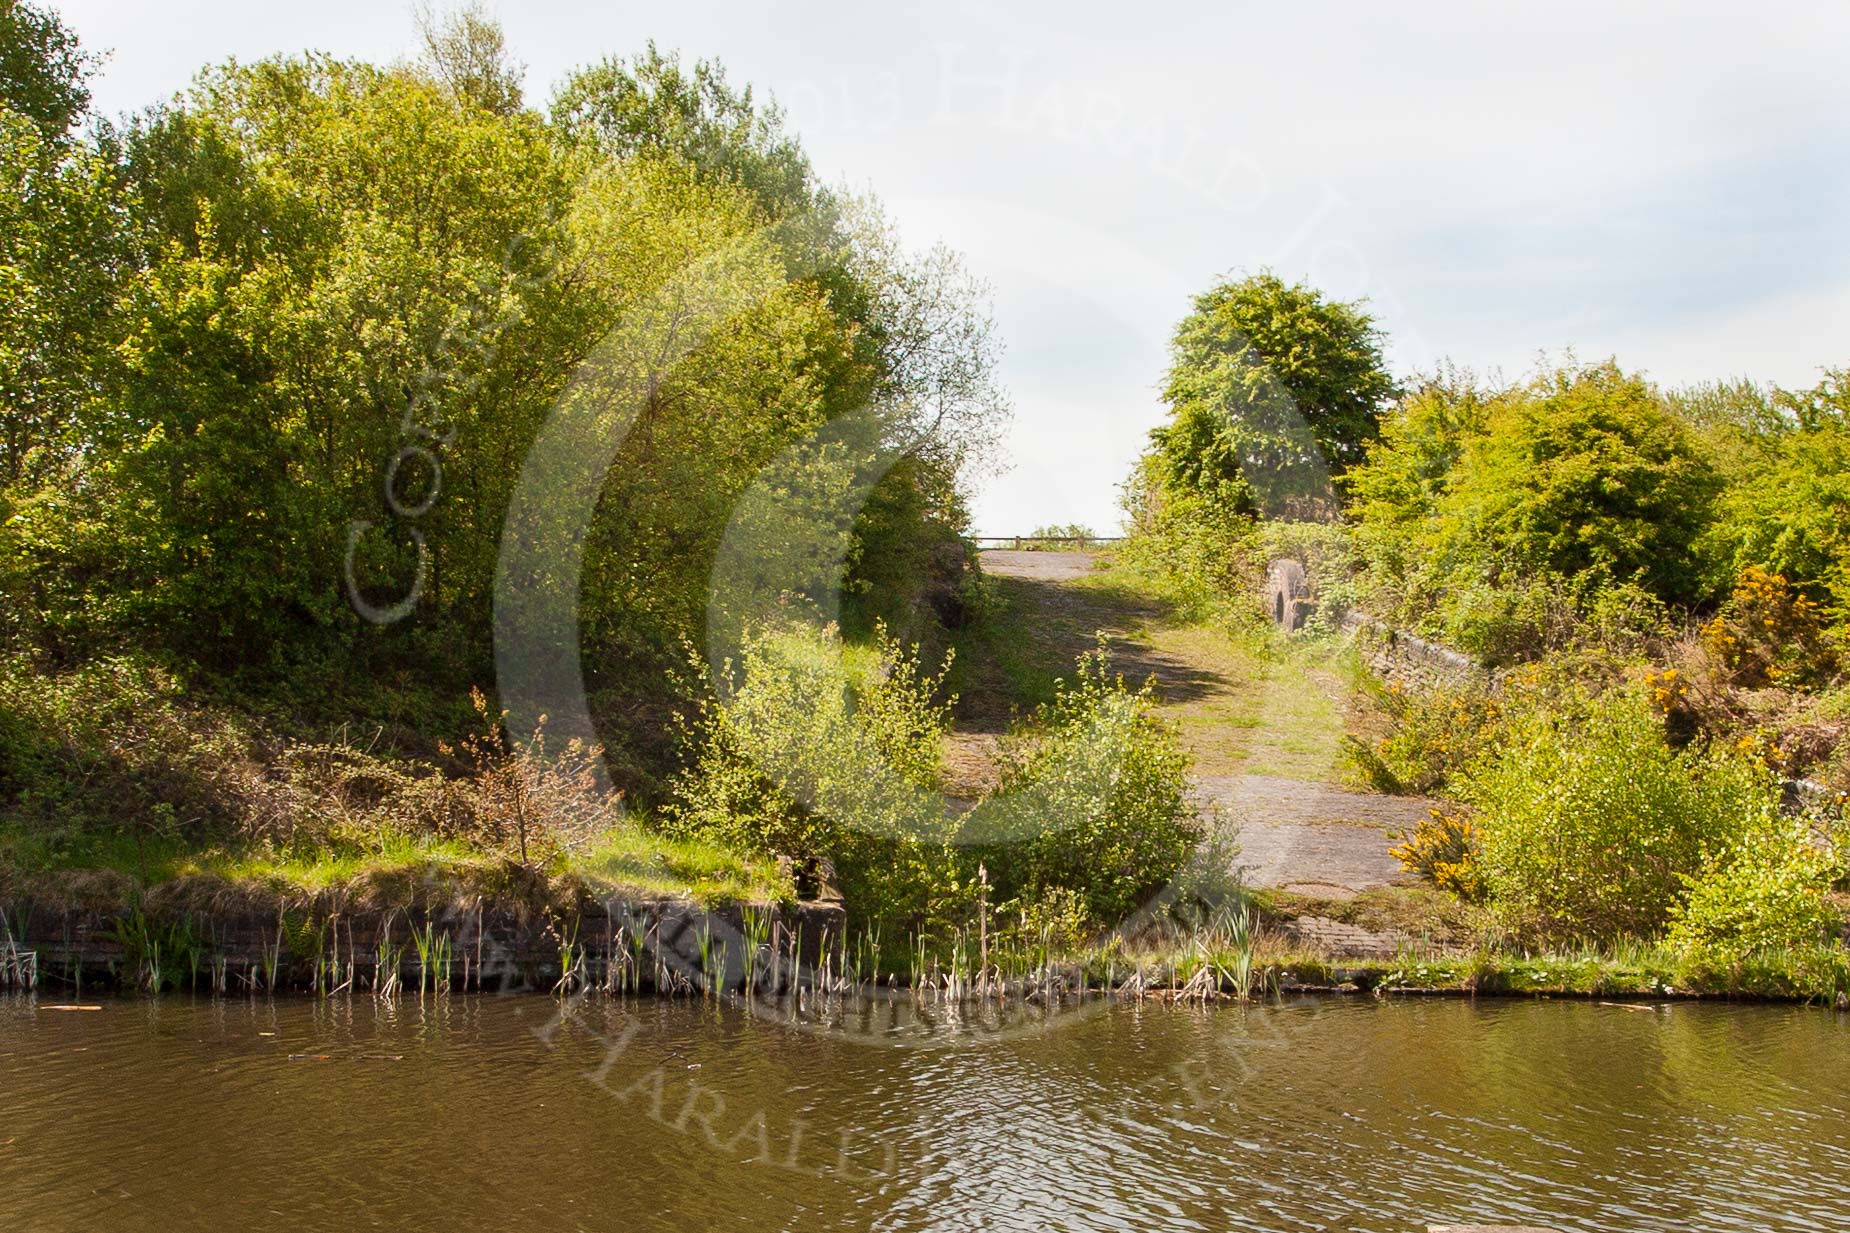 BCN Marathon Challenge 2013: An overflow weir of Chasewater Reservoir at the Anglesey Branch of the Wyrley & Essington Canal..
Birmingham Canal Navigation,


United Kingdom,
on 26 May 2013 at 10:48, image #393